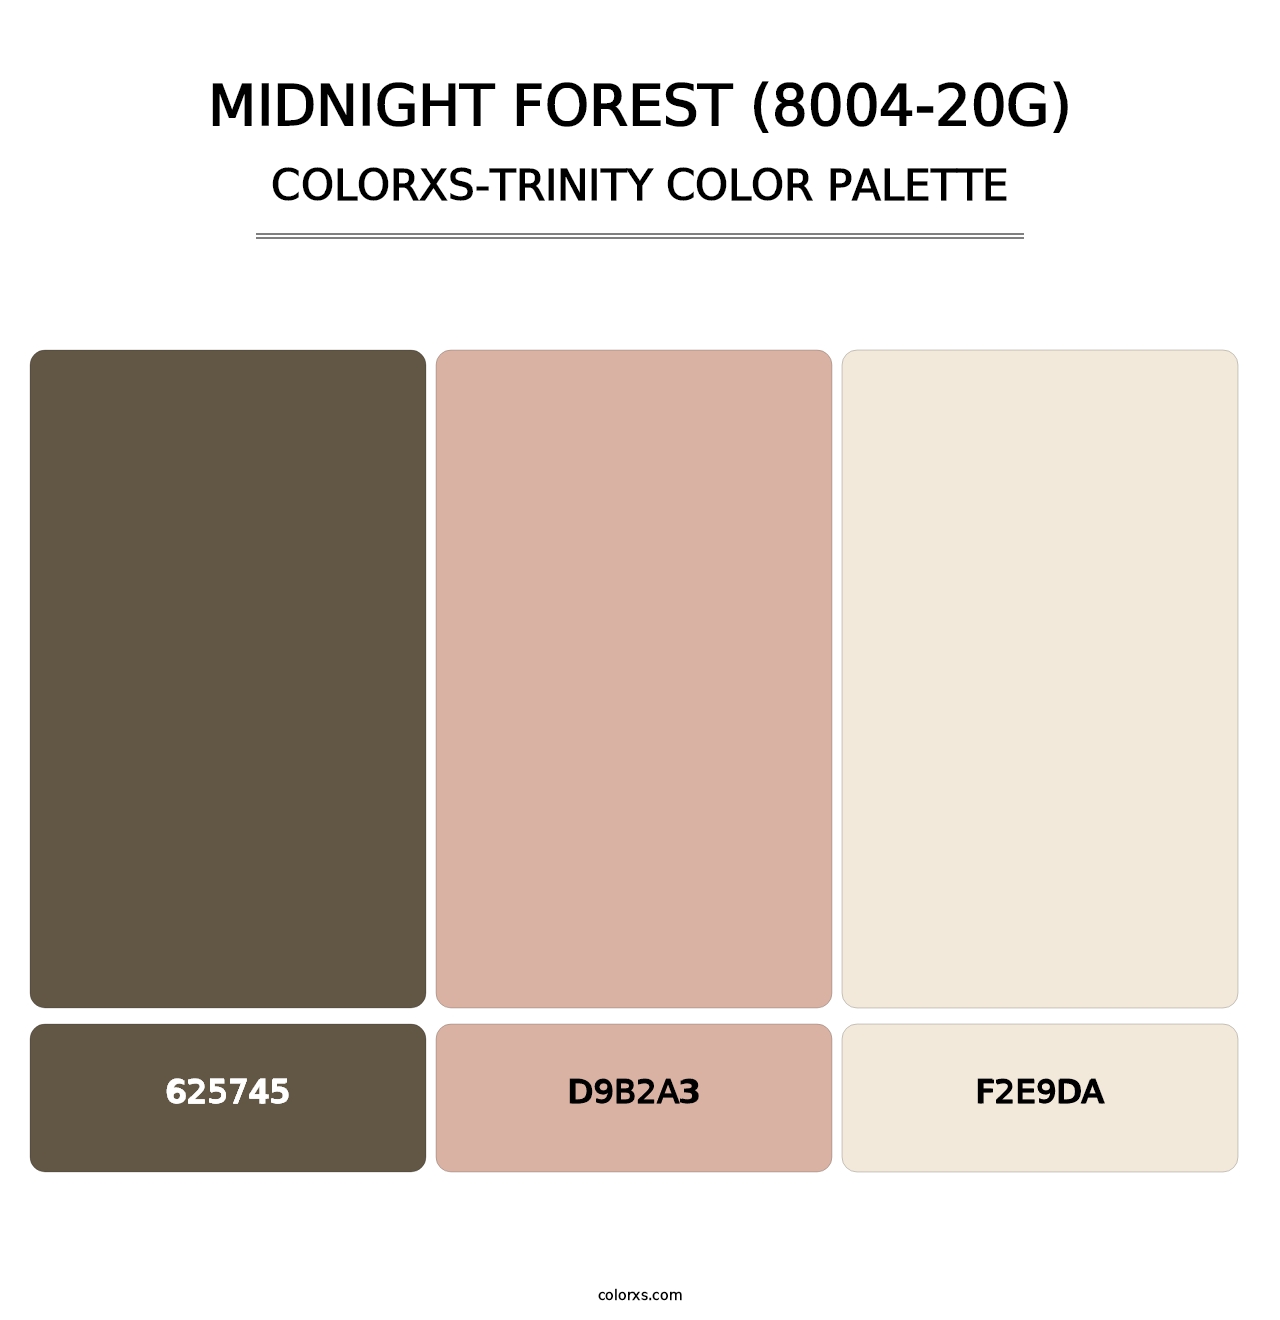 Midnight Forest (8004-20G) - Colorxs Trinity Palette